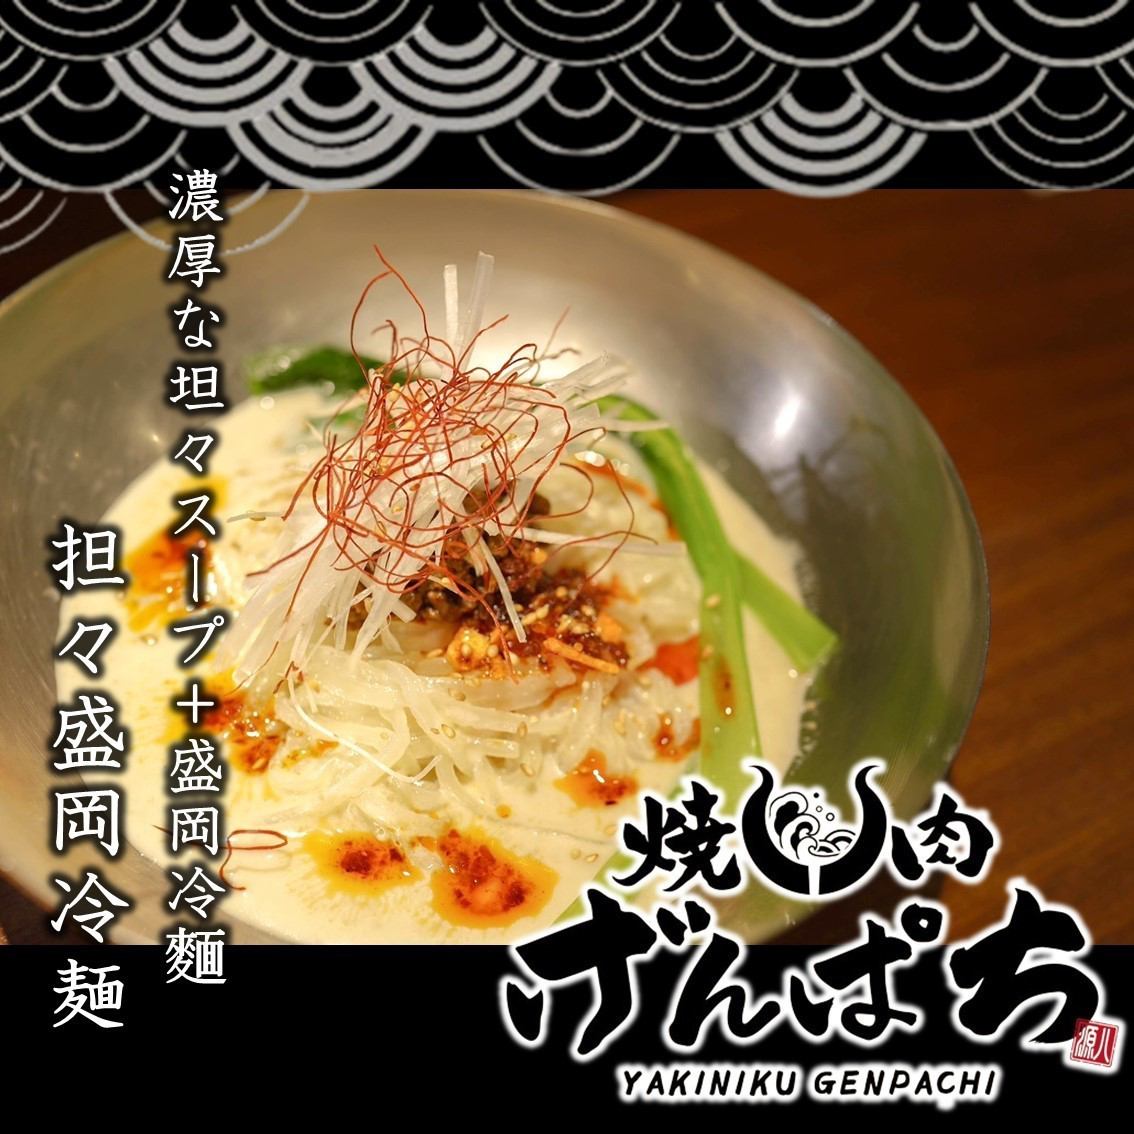 ``Tandan Morioka Reimen'' with its rich tandan soup and cold noodles is a must-try dish!